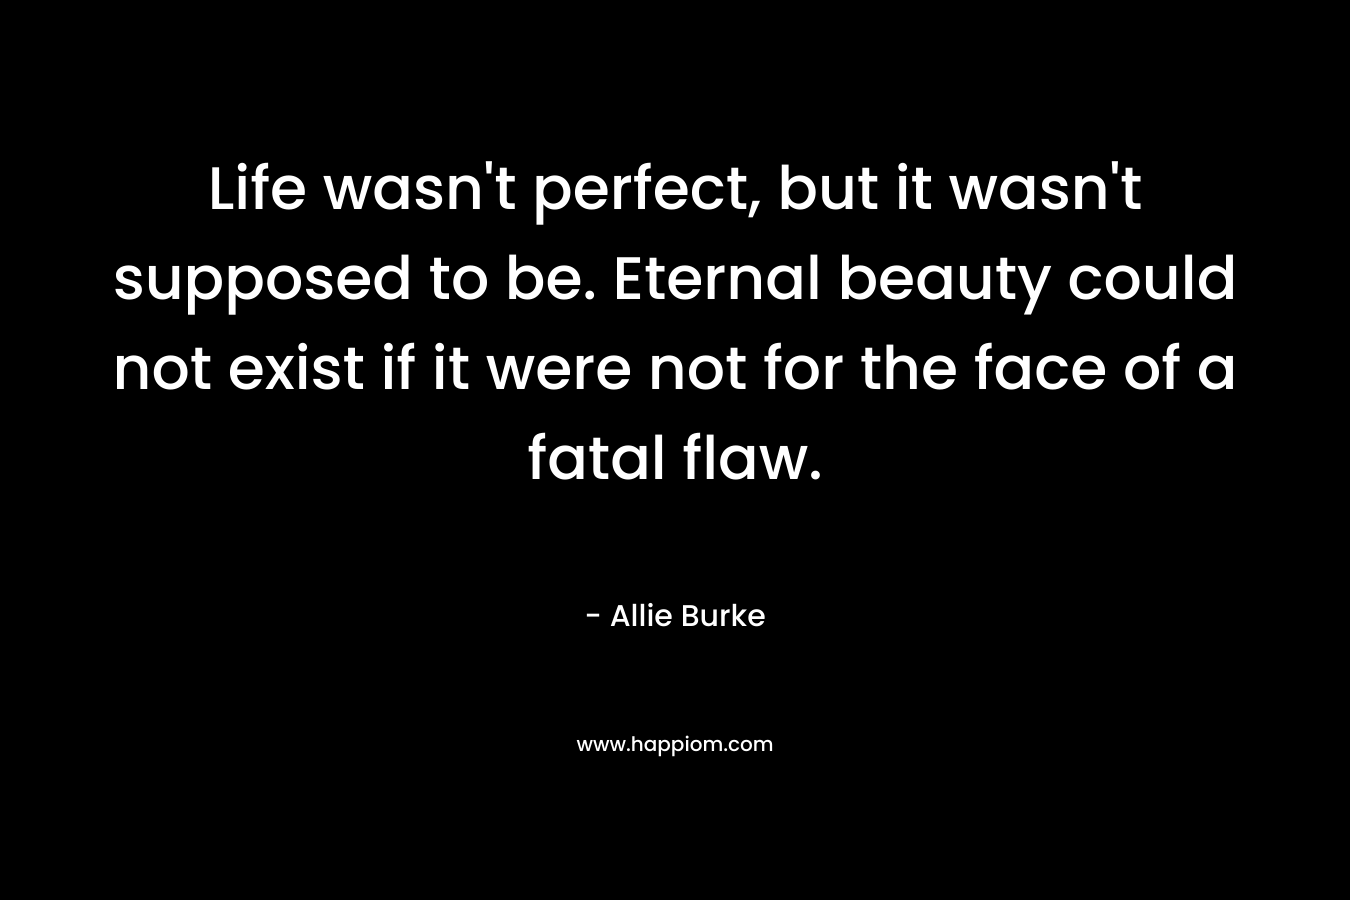 Life wasn’t perfect, but it wasn’t supposed to be. Eternal beauty could not exist if it were not for the face of a fatal flaw. – Allie Burke